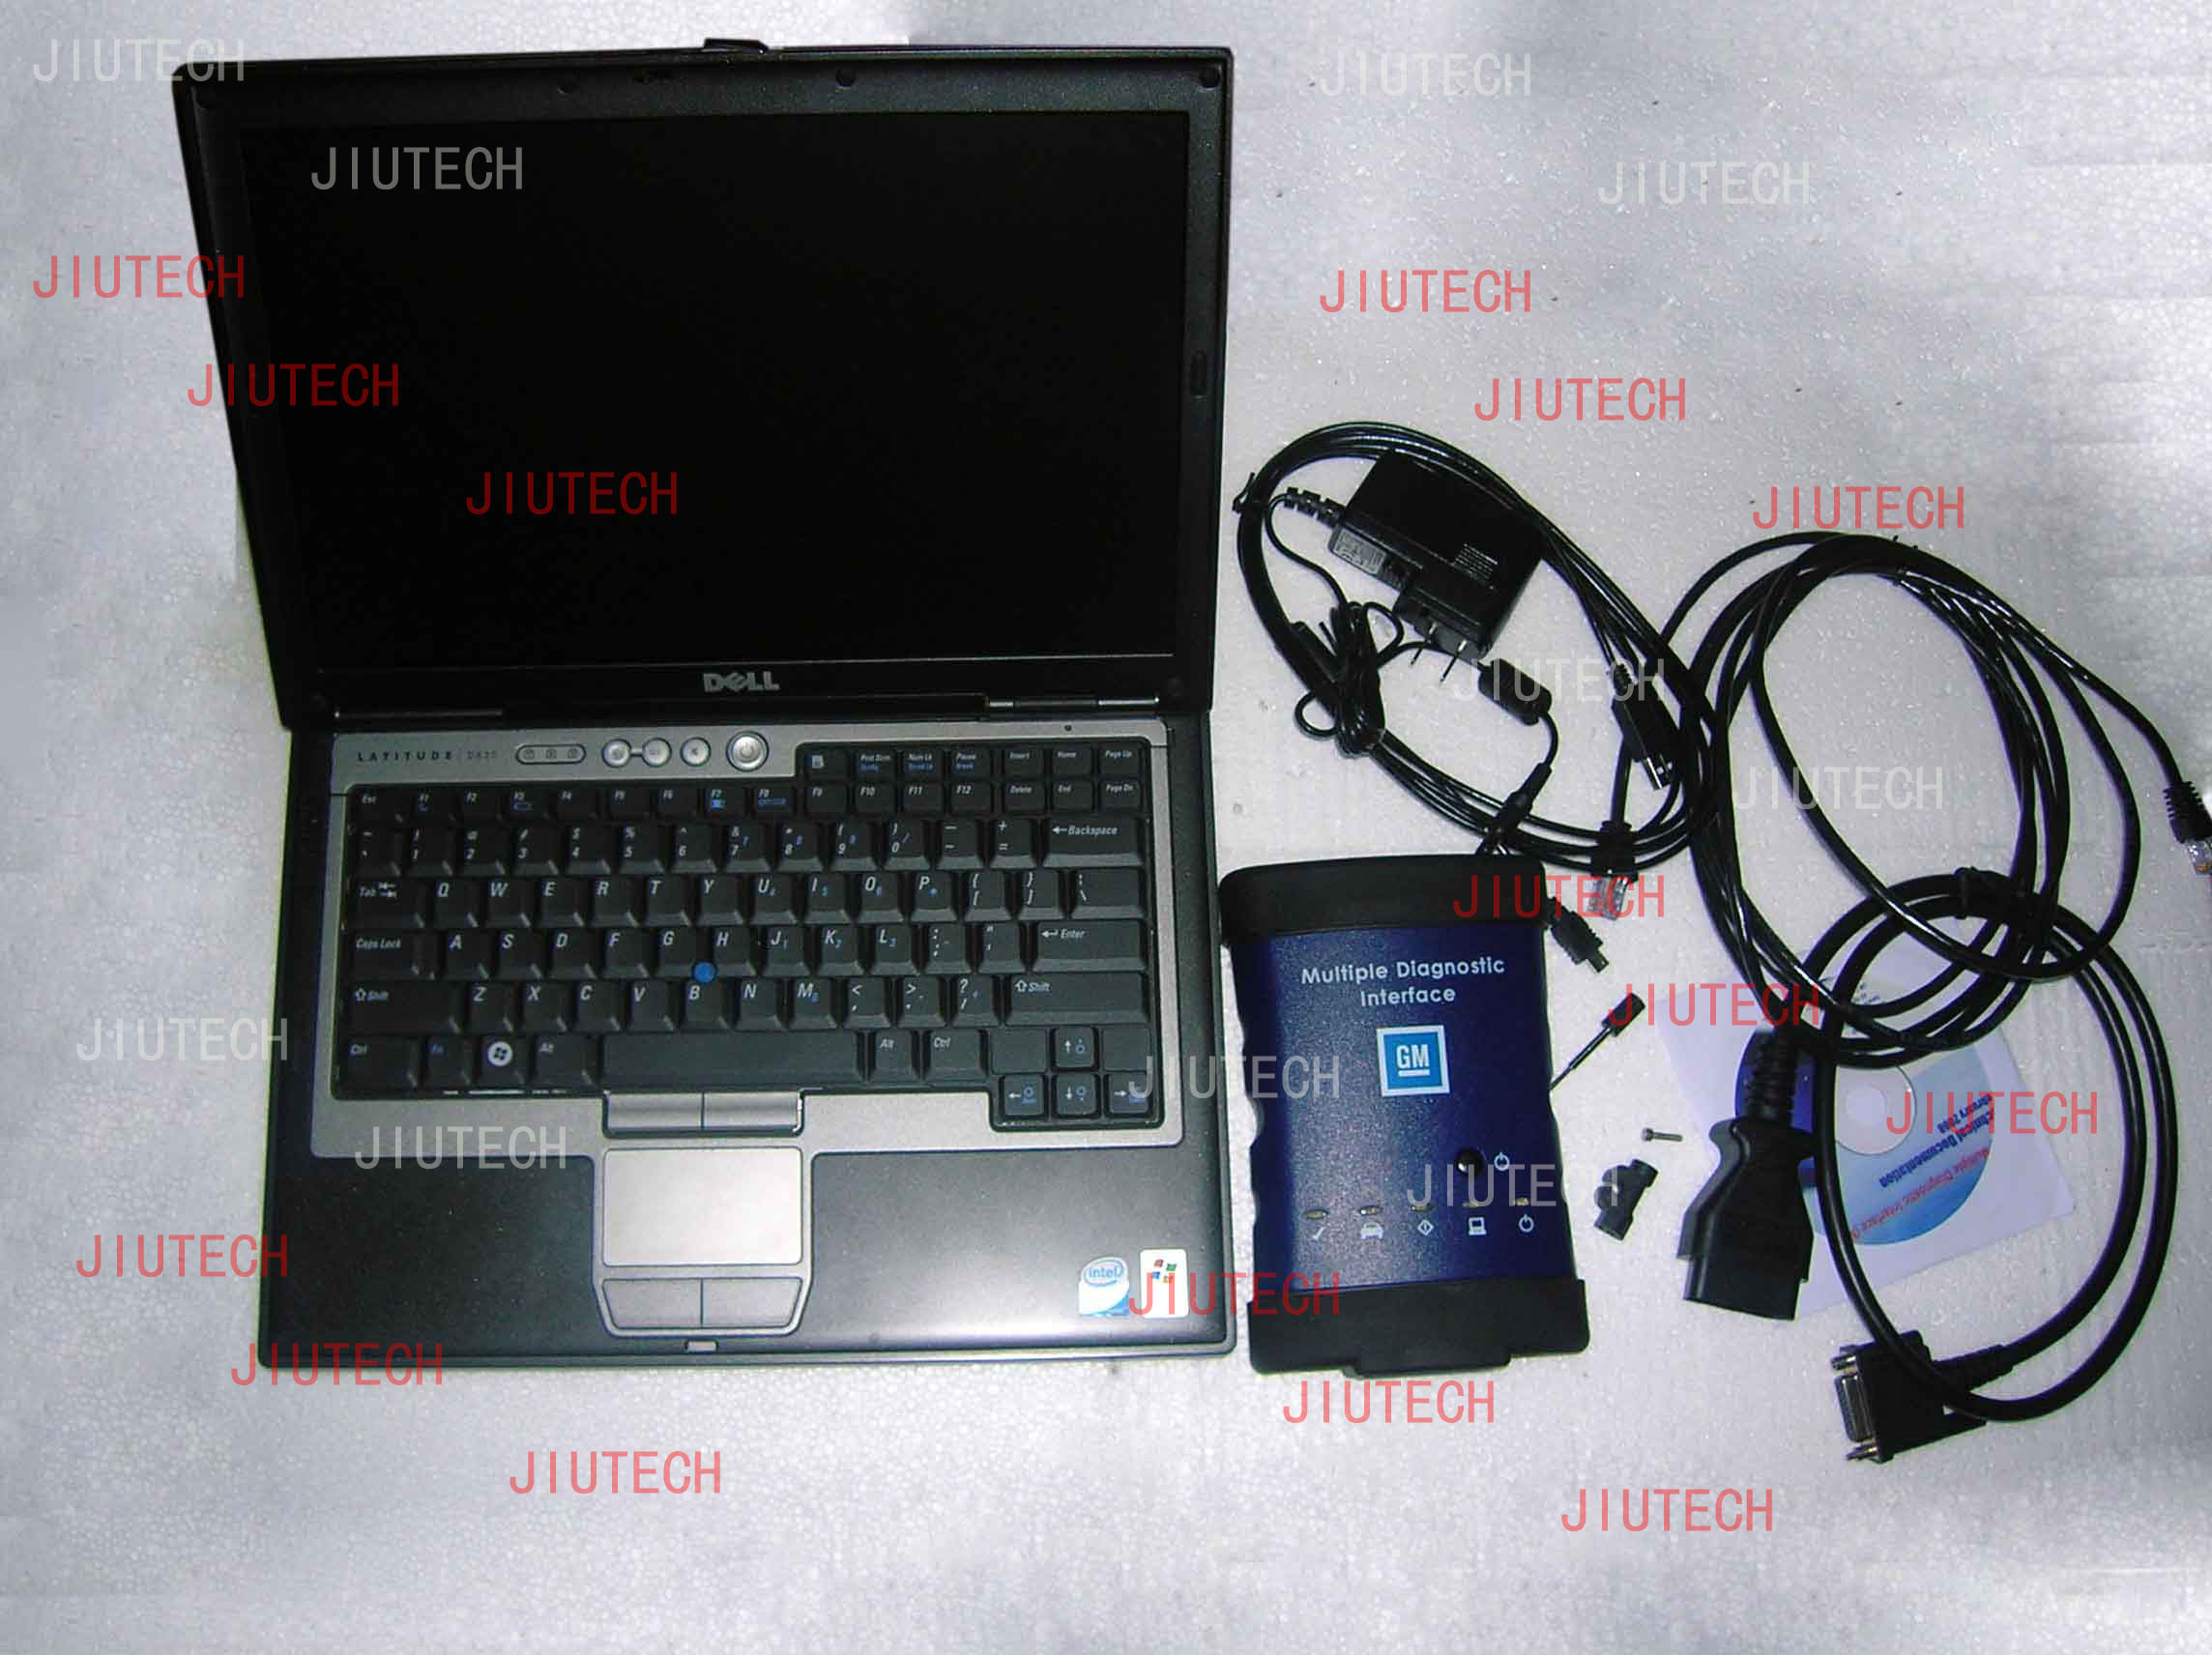 Quality D630 laptop with Original GM MDI Diagnostic & Rerogramming for GM SAAB OPEL Holden GMC Dae for sale